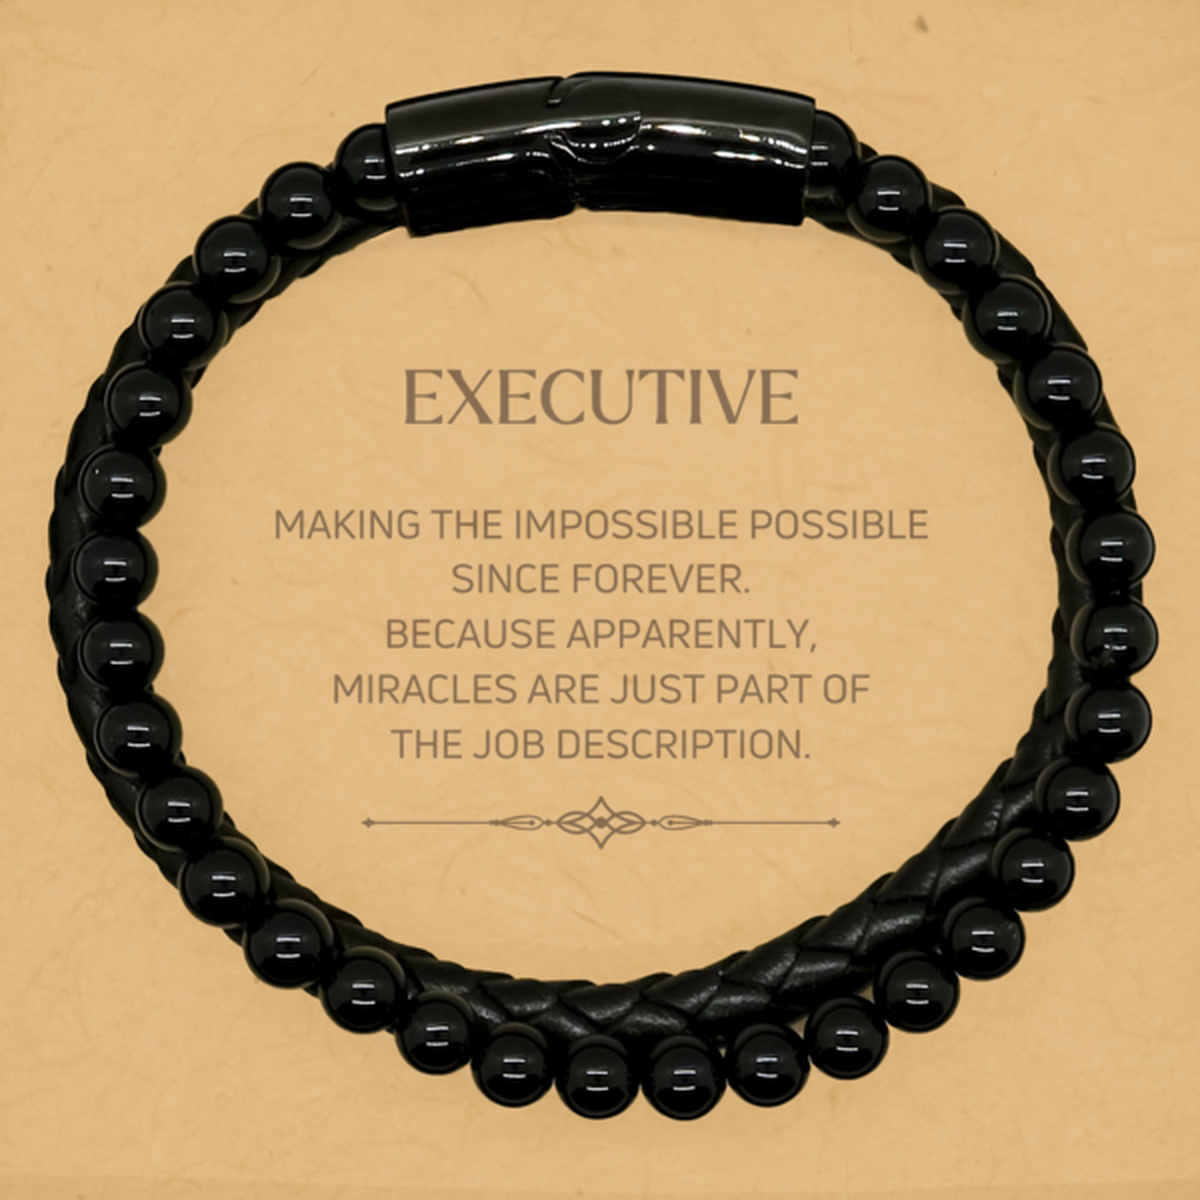 Funny Executive Gifts, Miracles are just part of the job description, Inspirational Birthday Stone Leather Bracelets For Executive, Men, Women, Coworkers, Friends, Boss